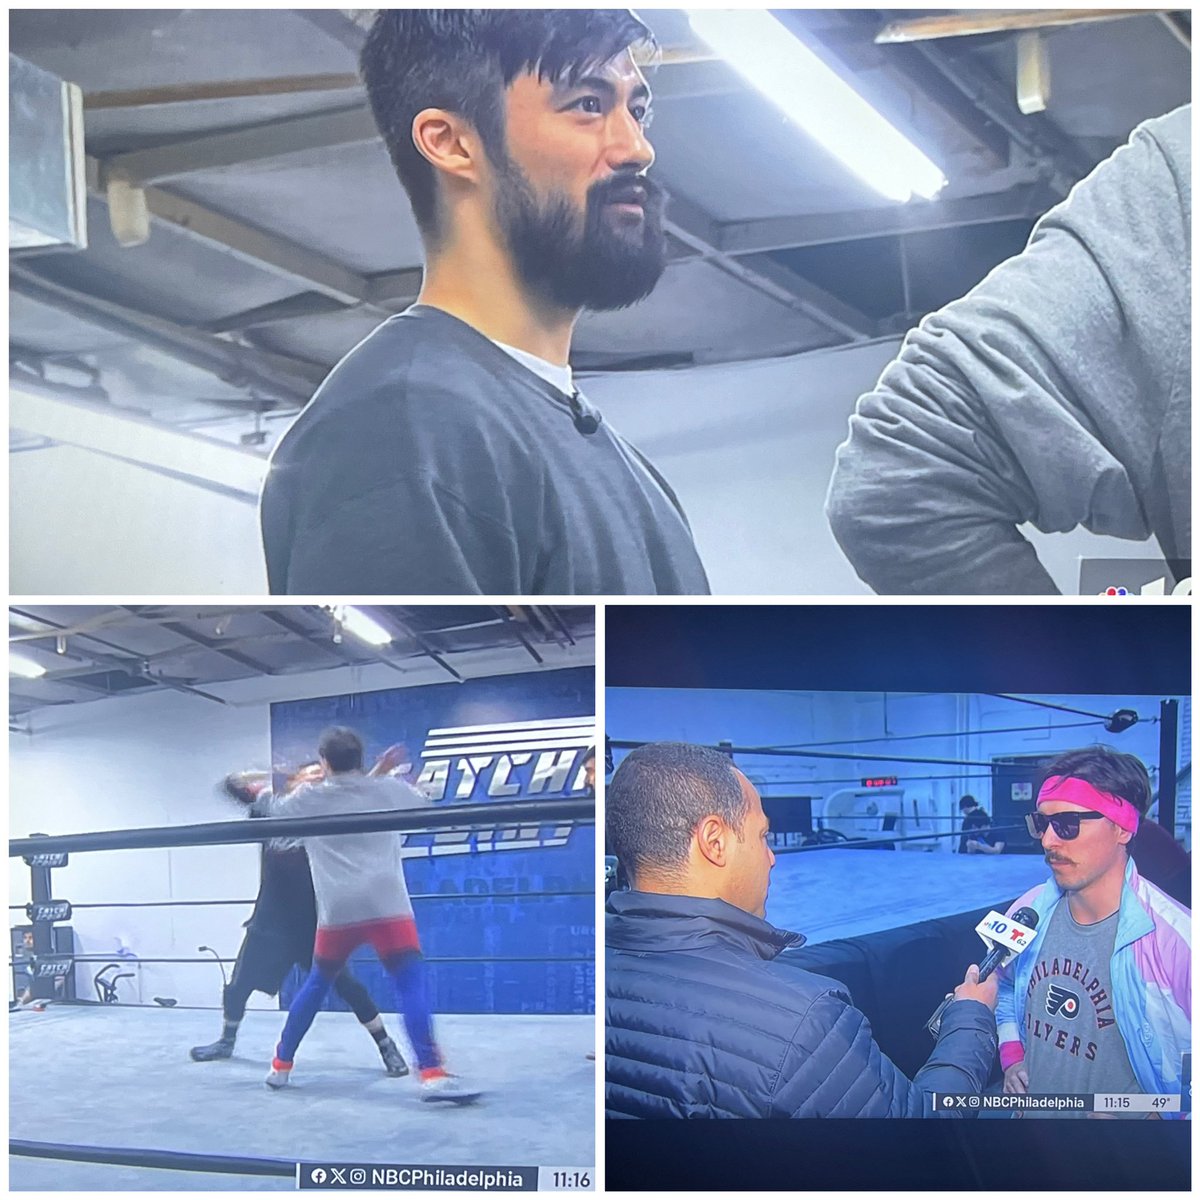 What an absolute treat to see a segment on @thecatchpoint with familiar faces & training wrestlers on @NBCPhiladelphia tonight! ✨#Philly #WrestleMania